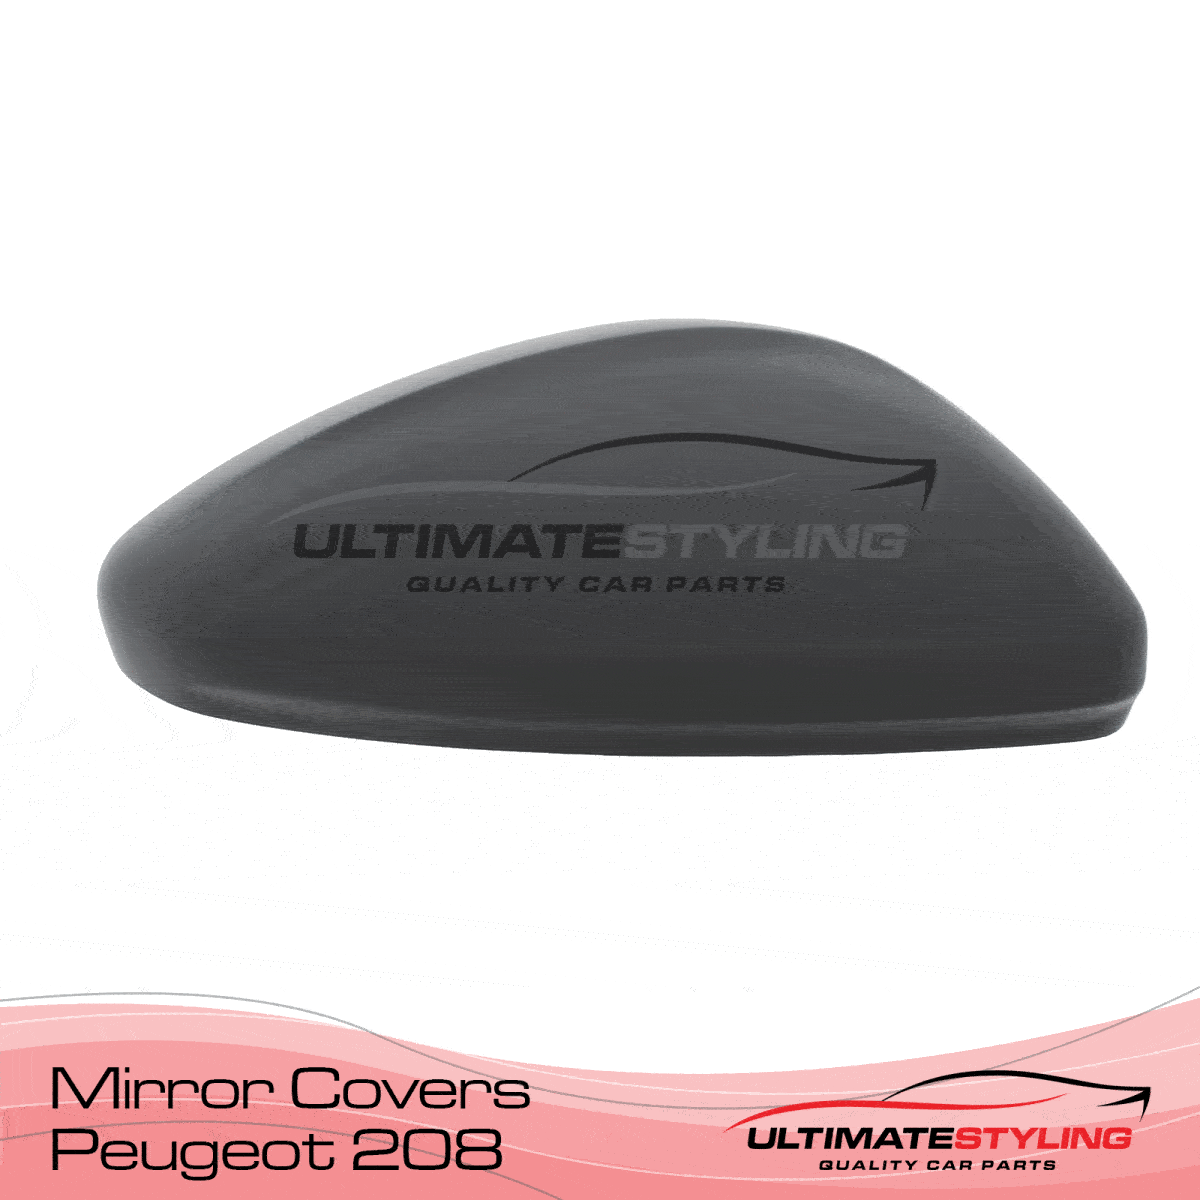 Peugeot 208 Wing Mirror Covers - Ultimate Styling